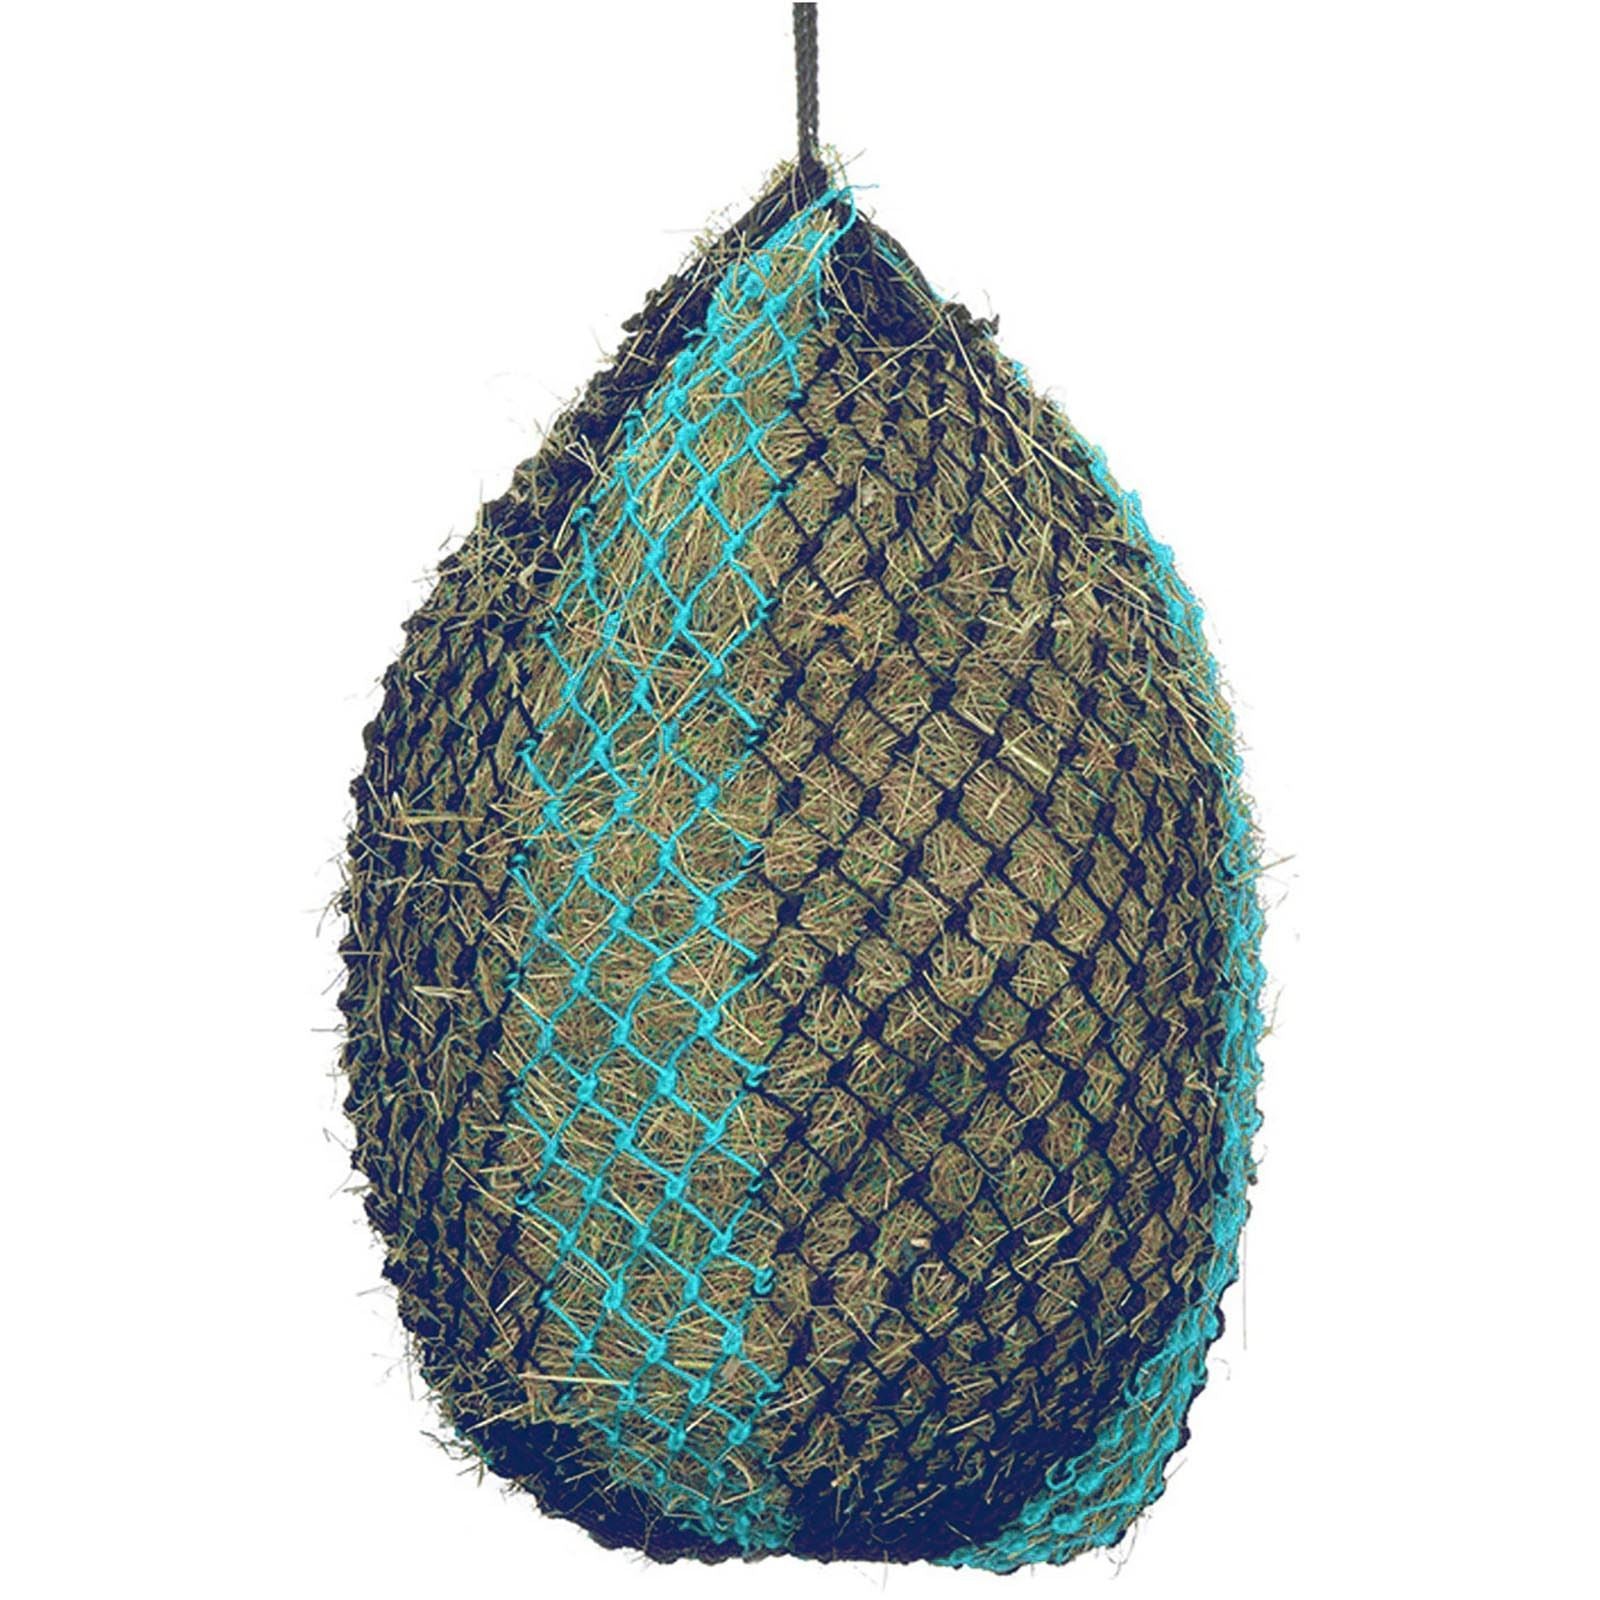 Perry Equestrian 50 Deluxe Polypropylene Hay/Haylage Net - Large 9.5Kg capacity" - Just Horse Riders